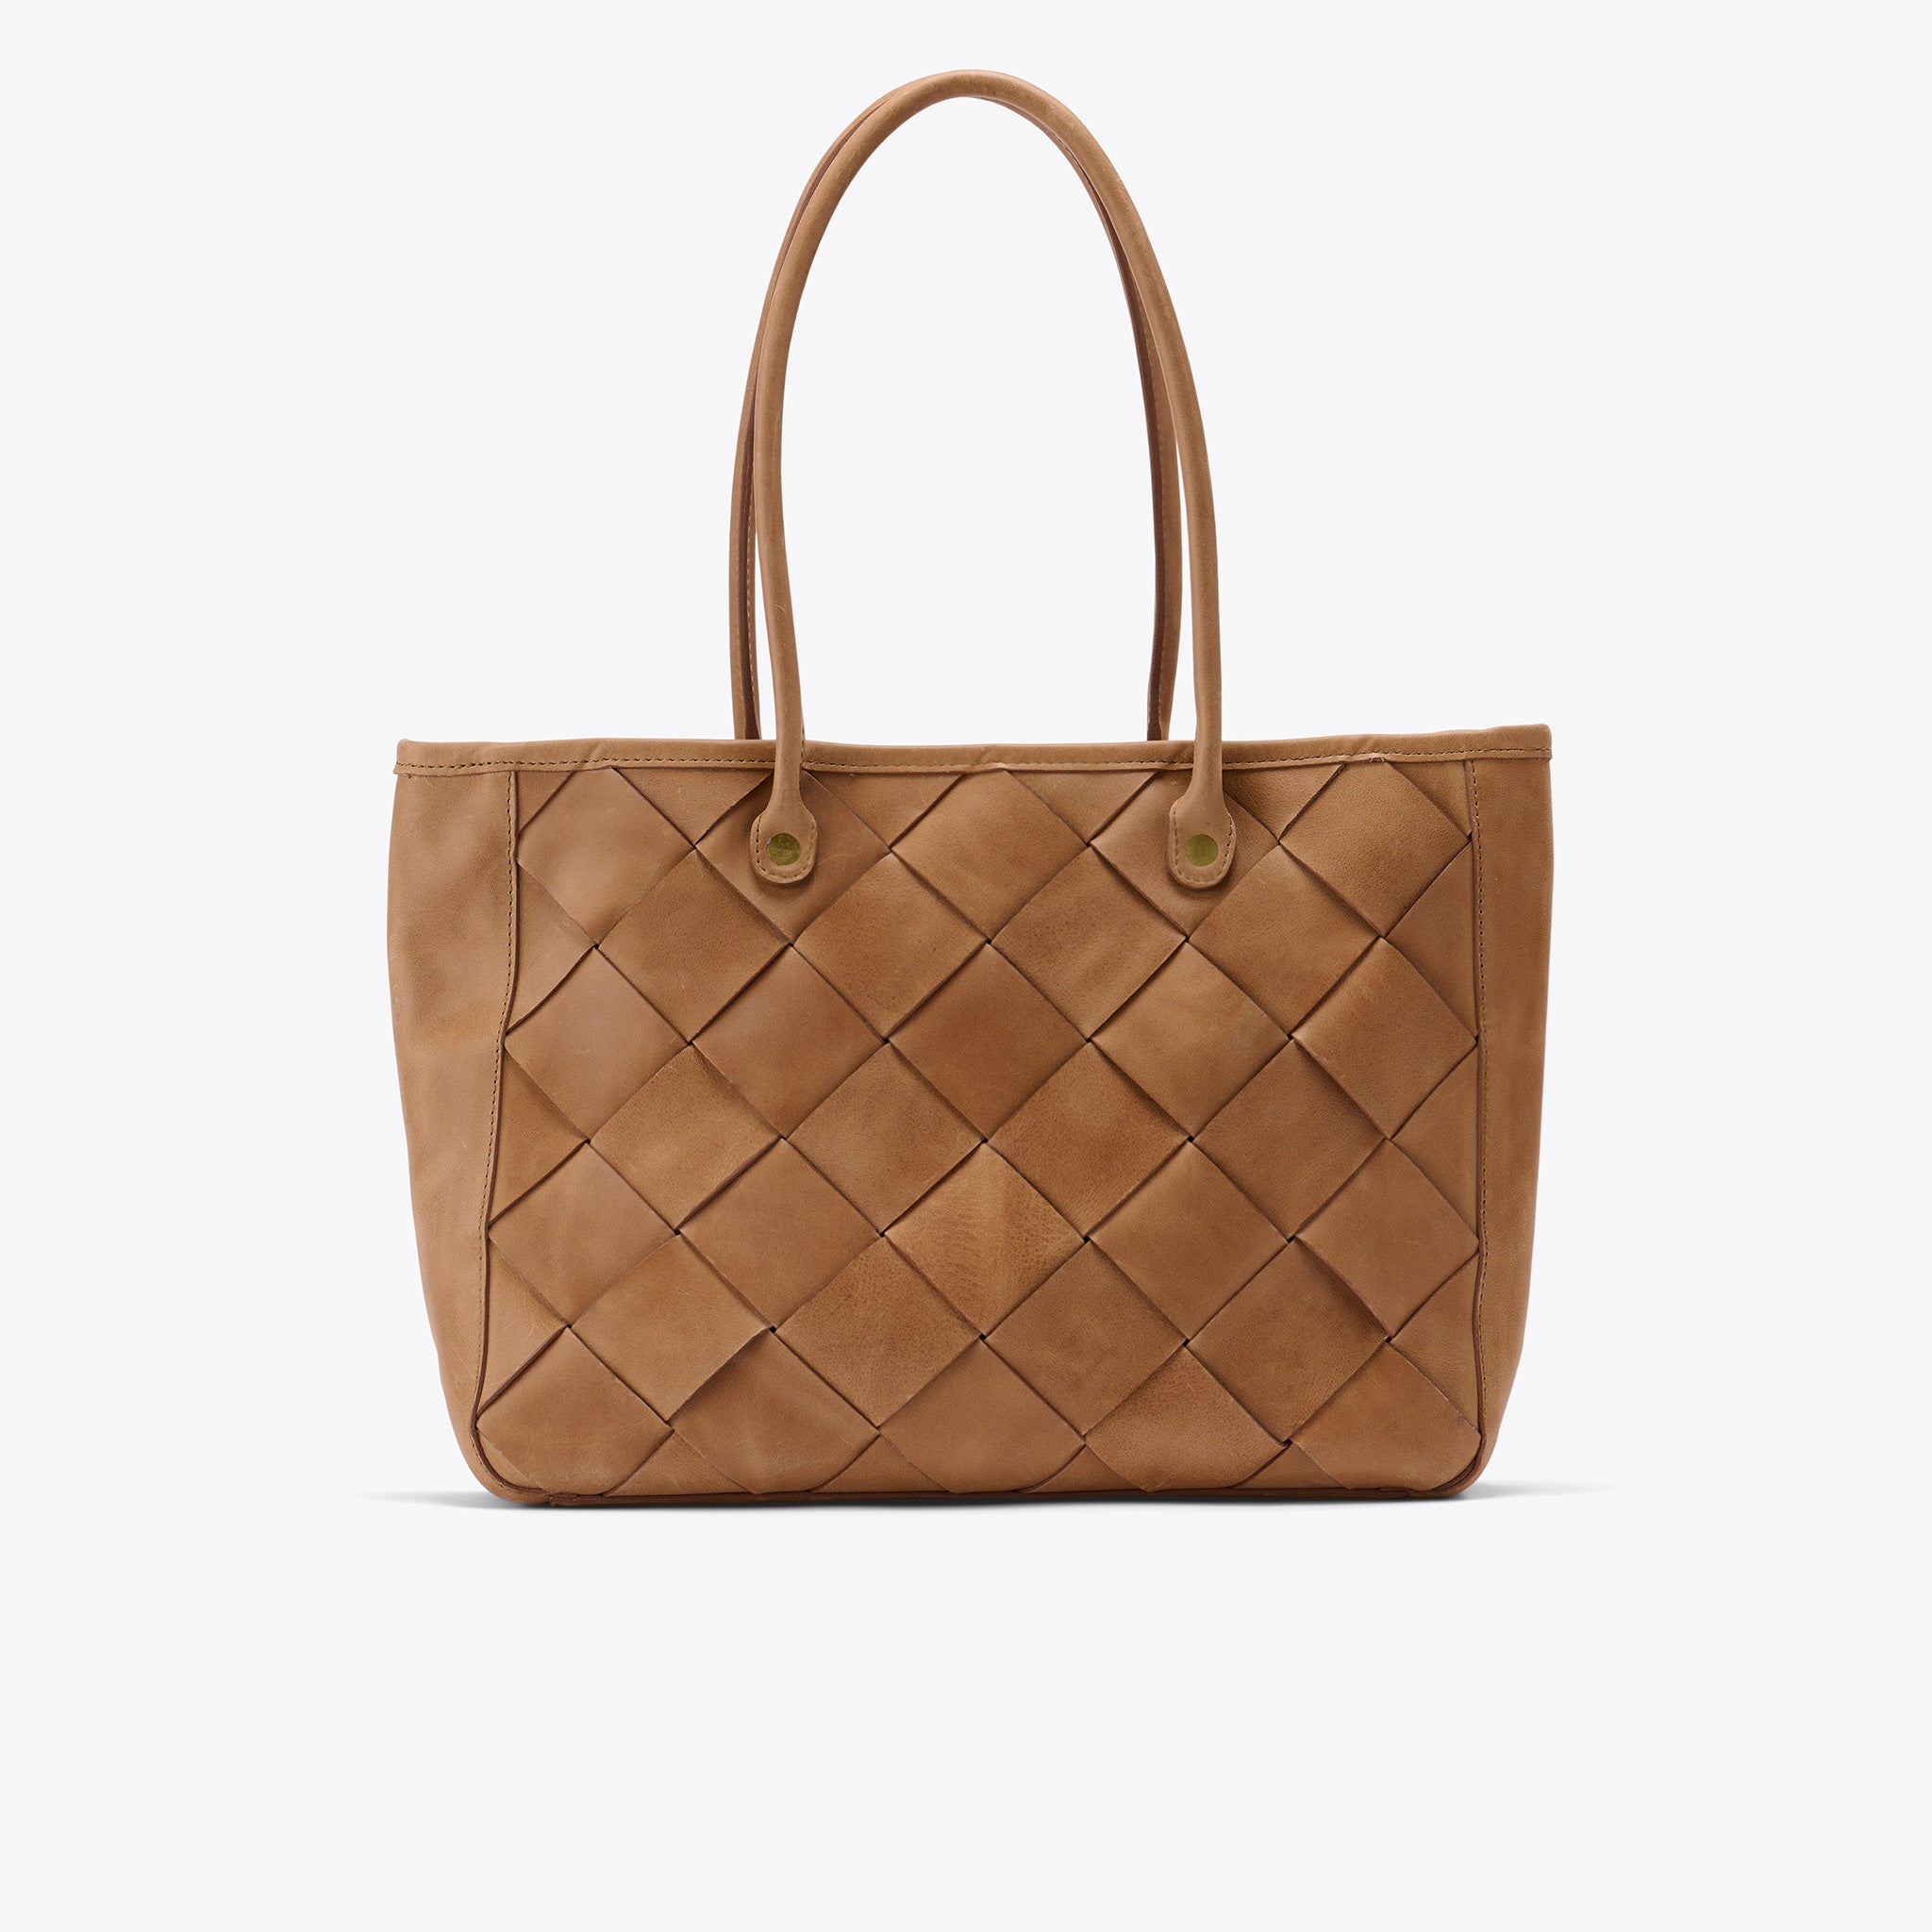 The Leila tote is the perfect on-the-go bag. With its neutral